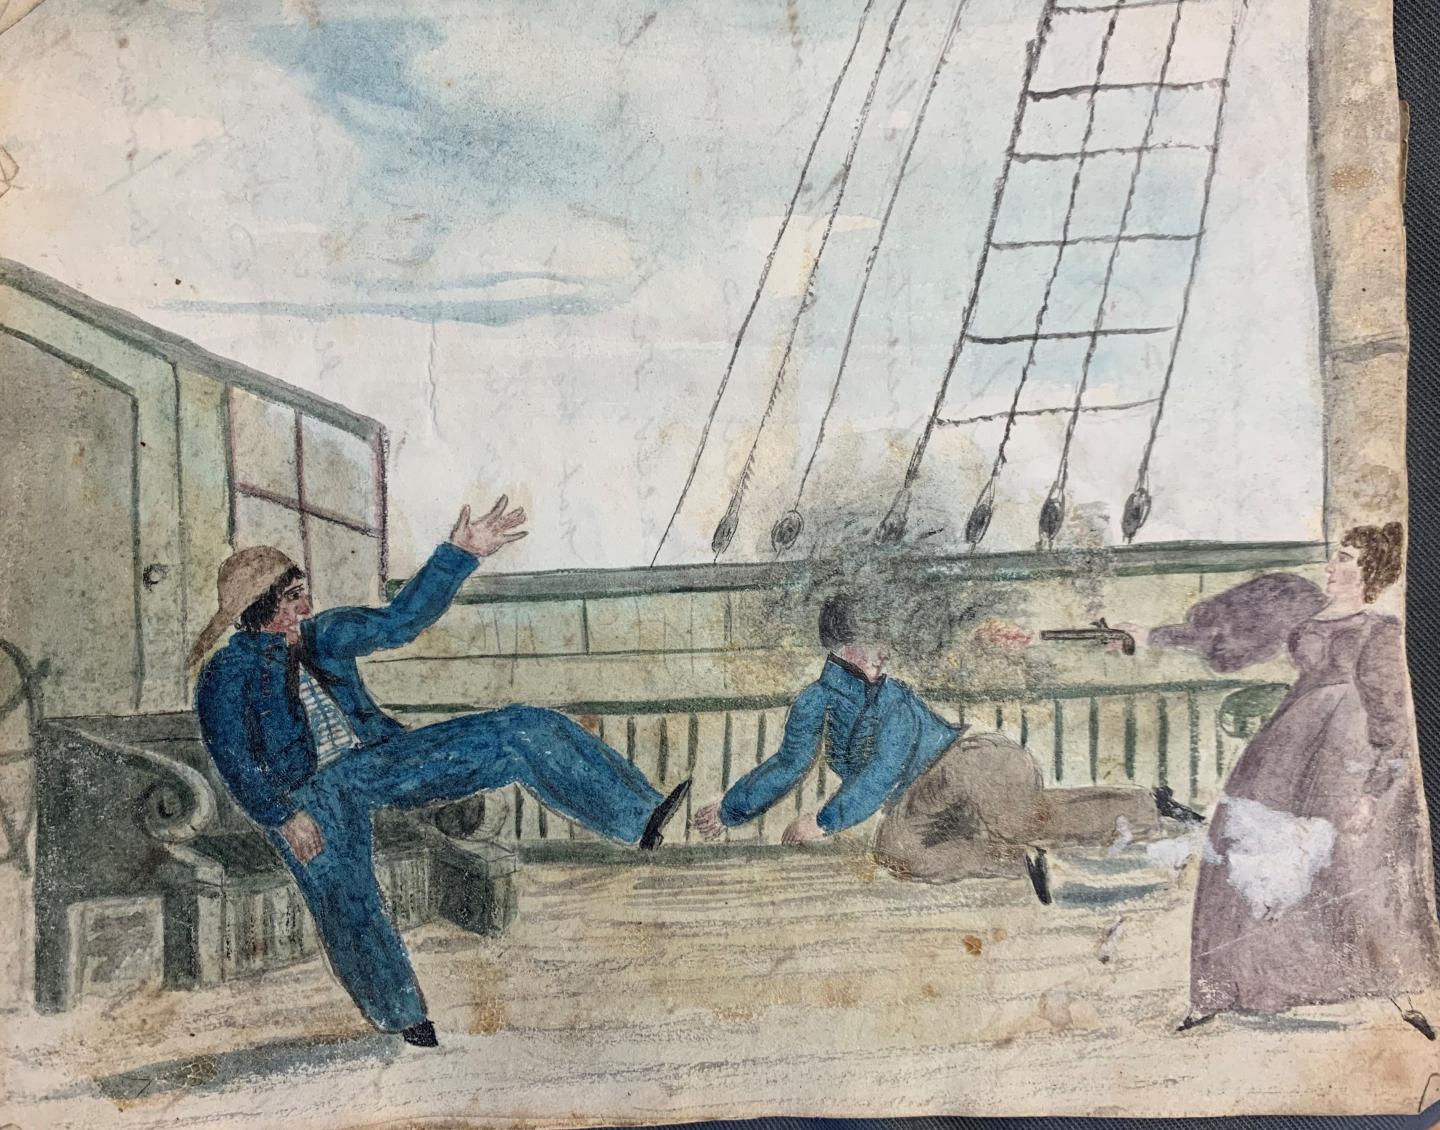 A duel on the deck of a ship in 1829